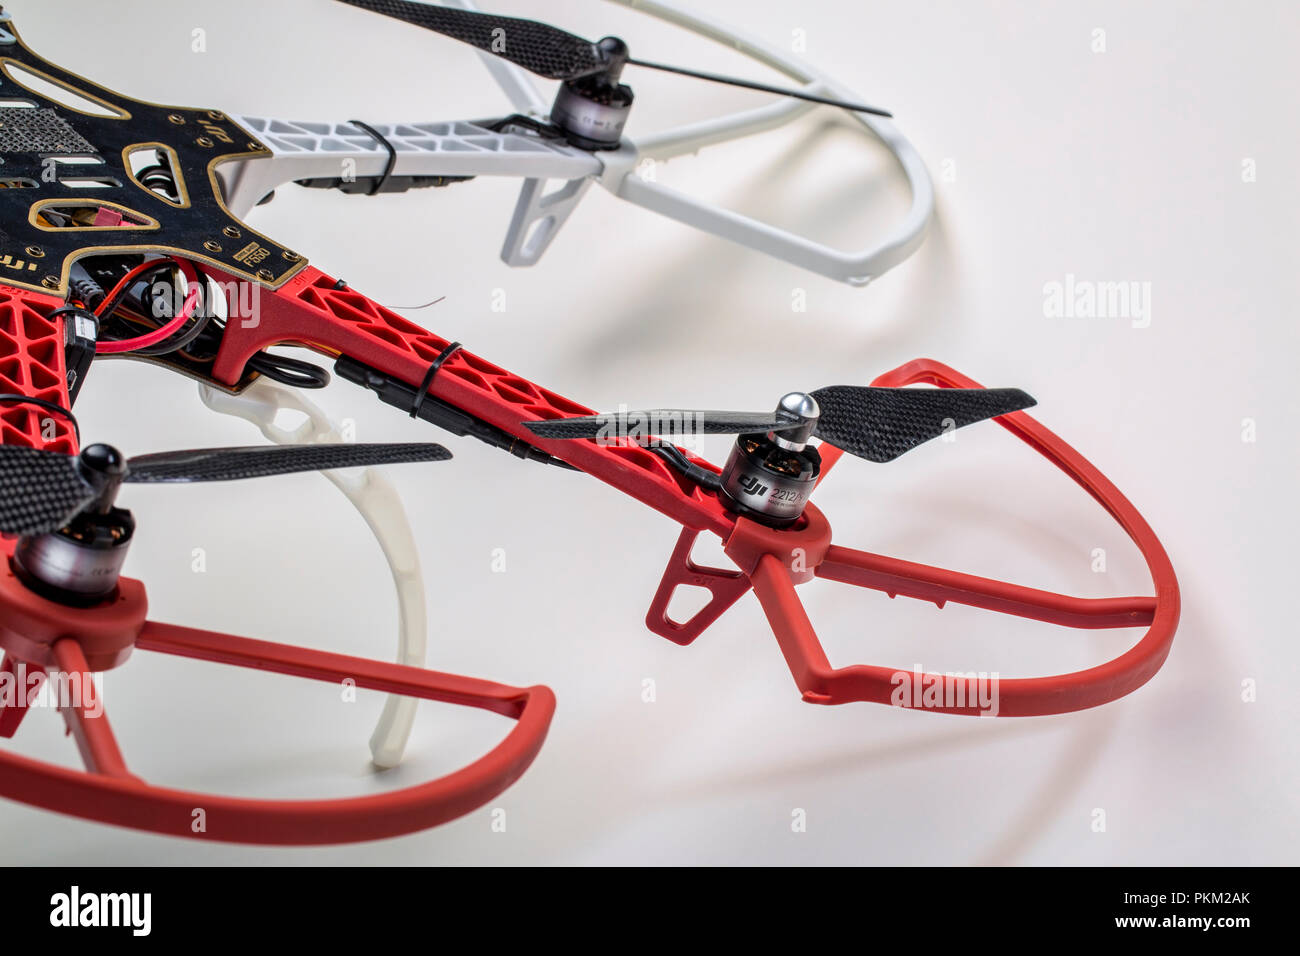 FORT COLLINS, CO, USA, December 12, 2014: A detail of the DJI F550 Flame  Wheel hexacopter drone with propeller guards on a white background. Thi  Stock Photo - Alamy